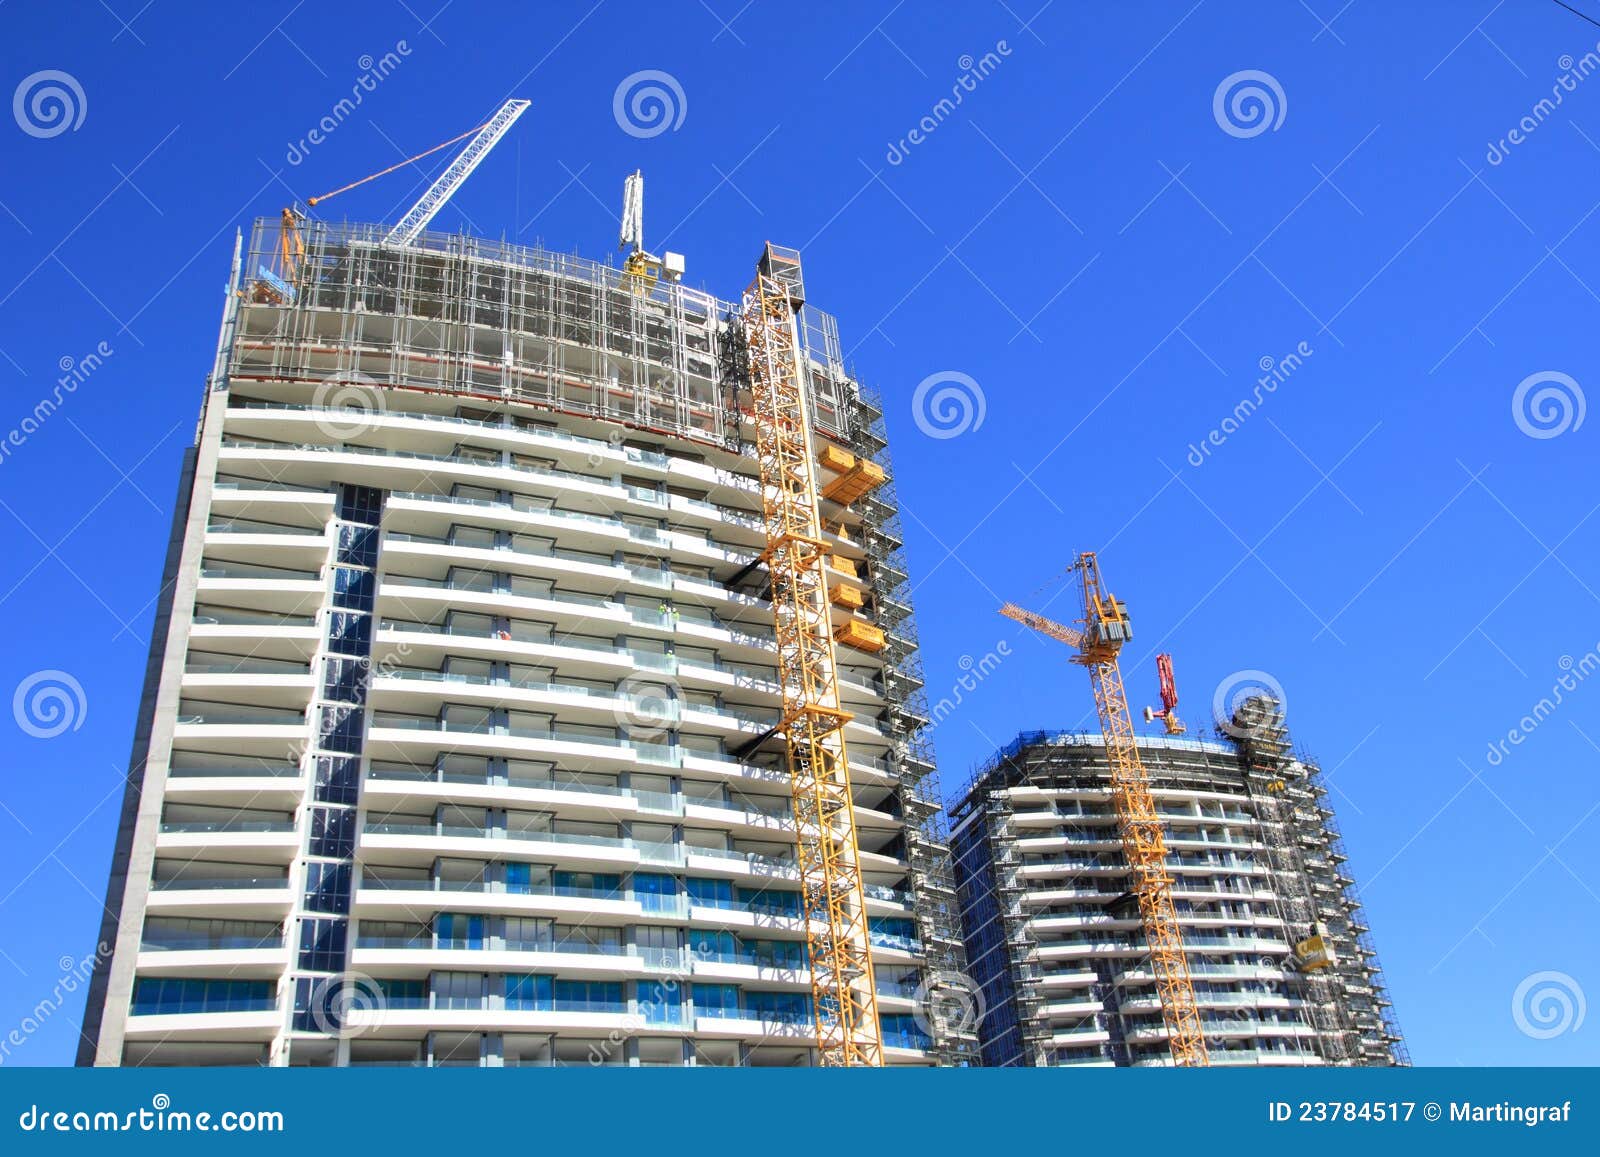 construction of two high-rise buildings